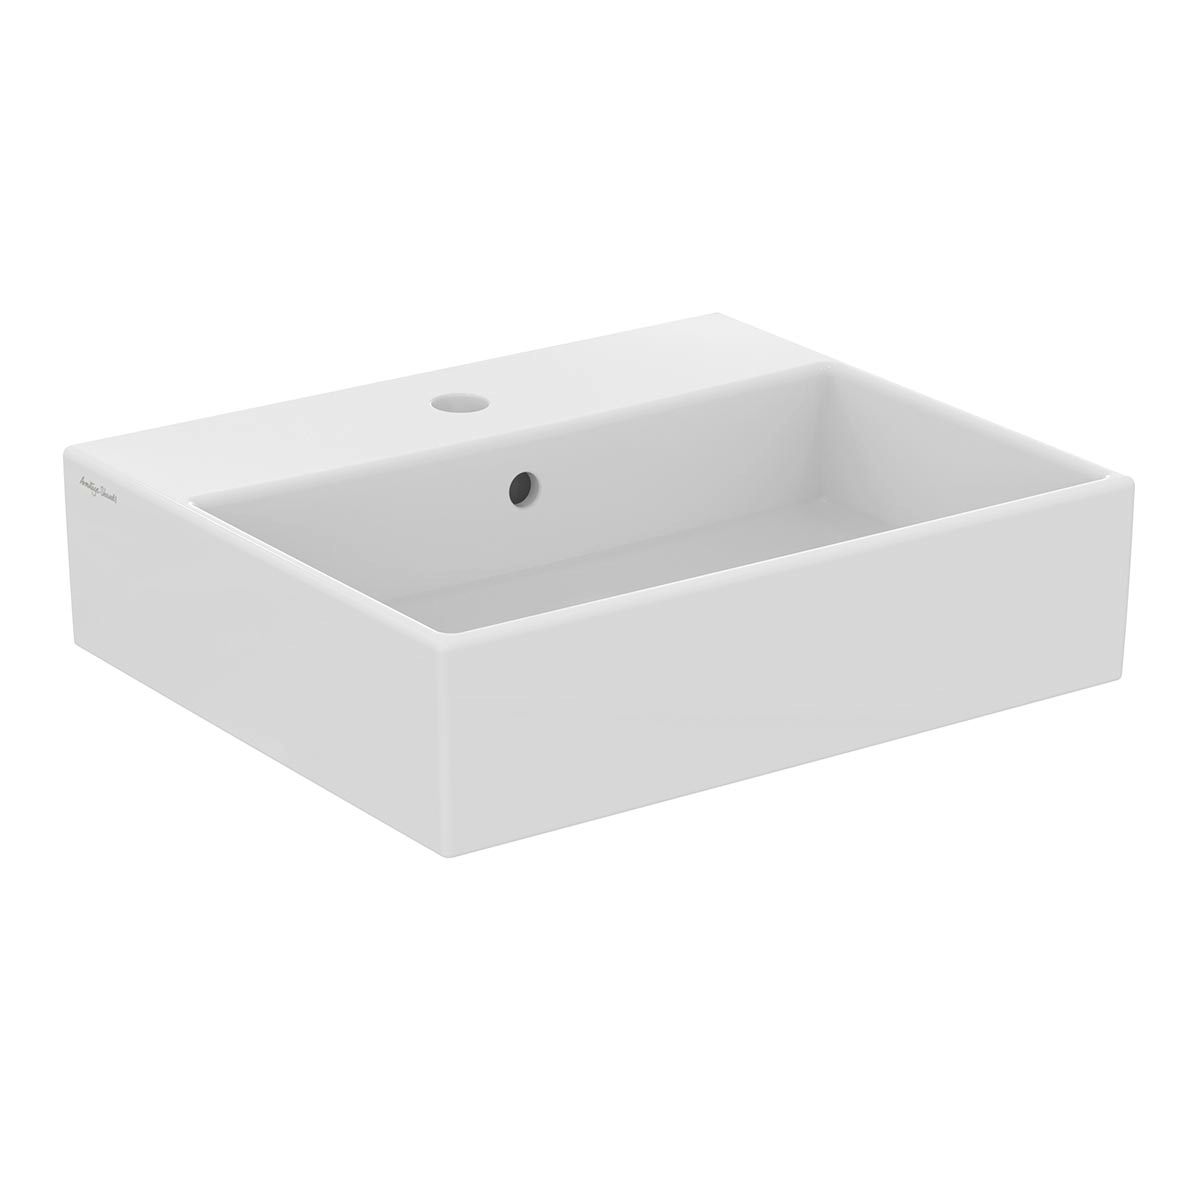 Armitage Shanks Edit S 1 tap hole wall hung or countertop basin 500mm